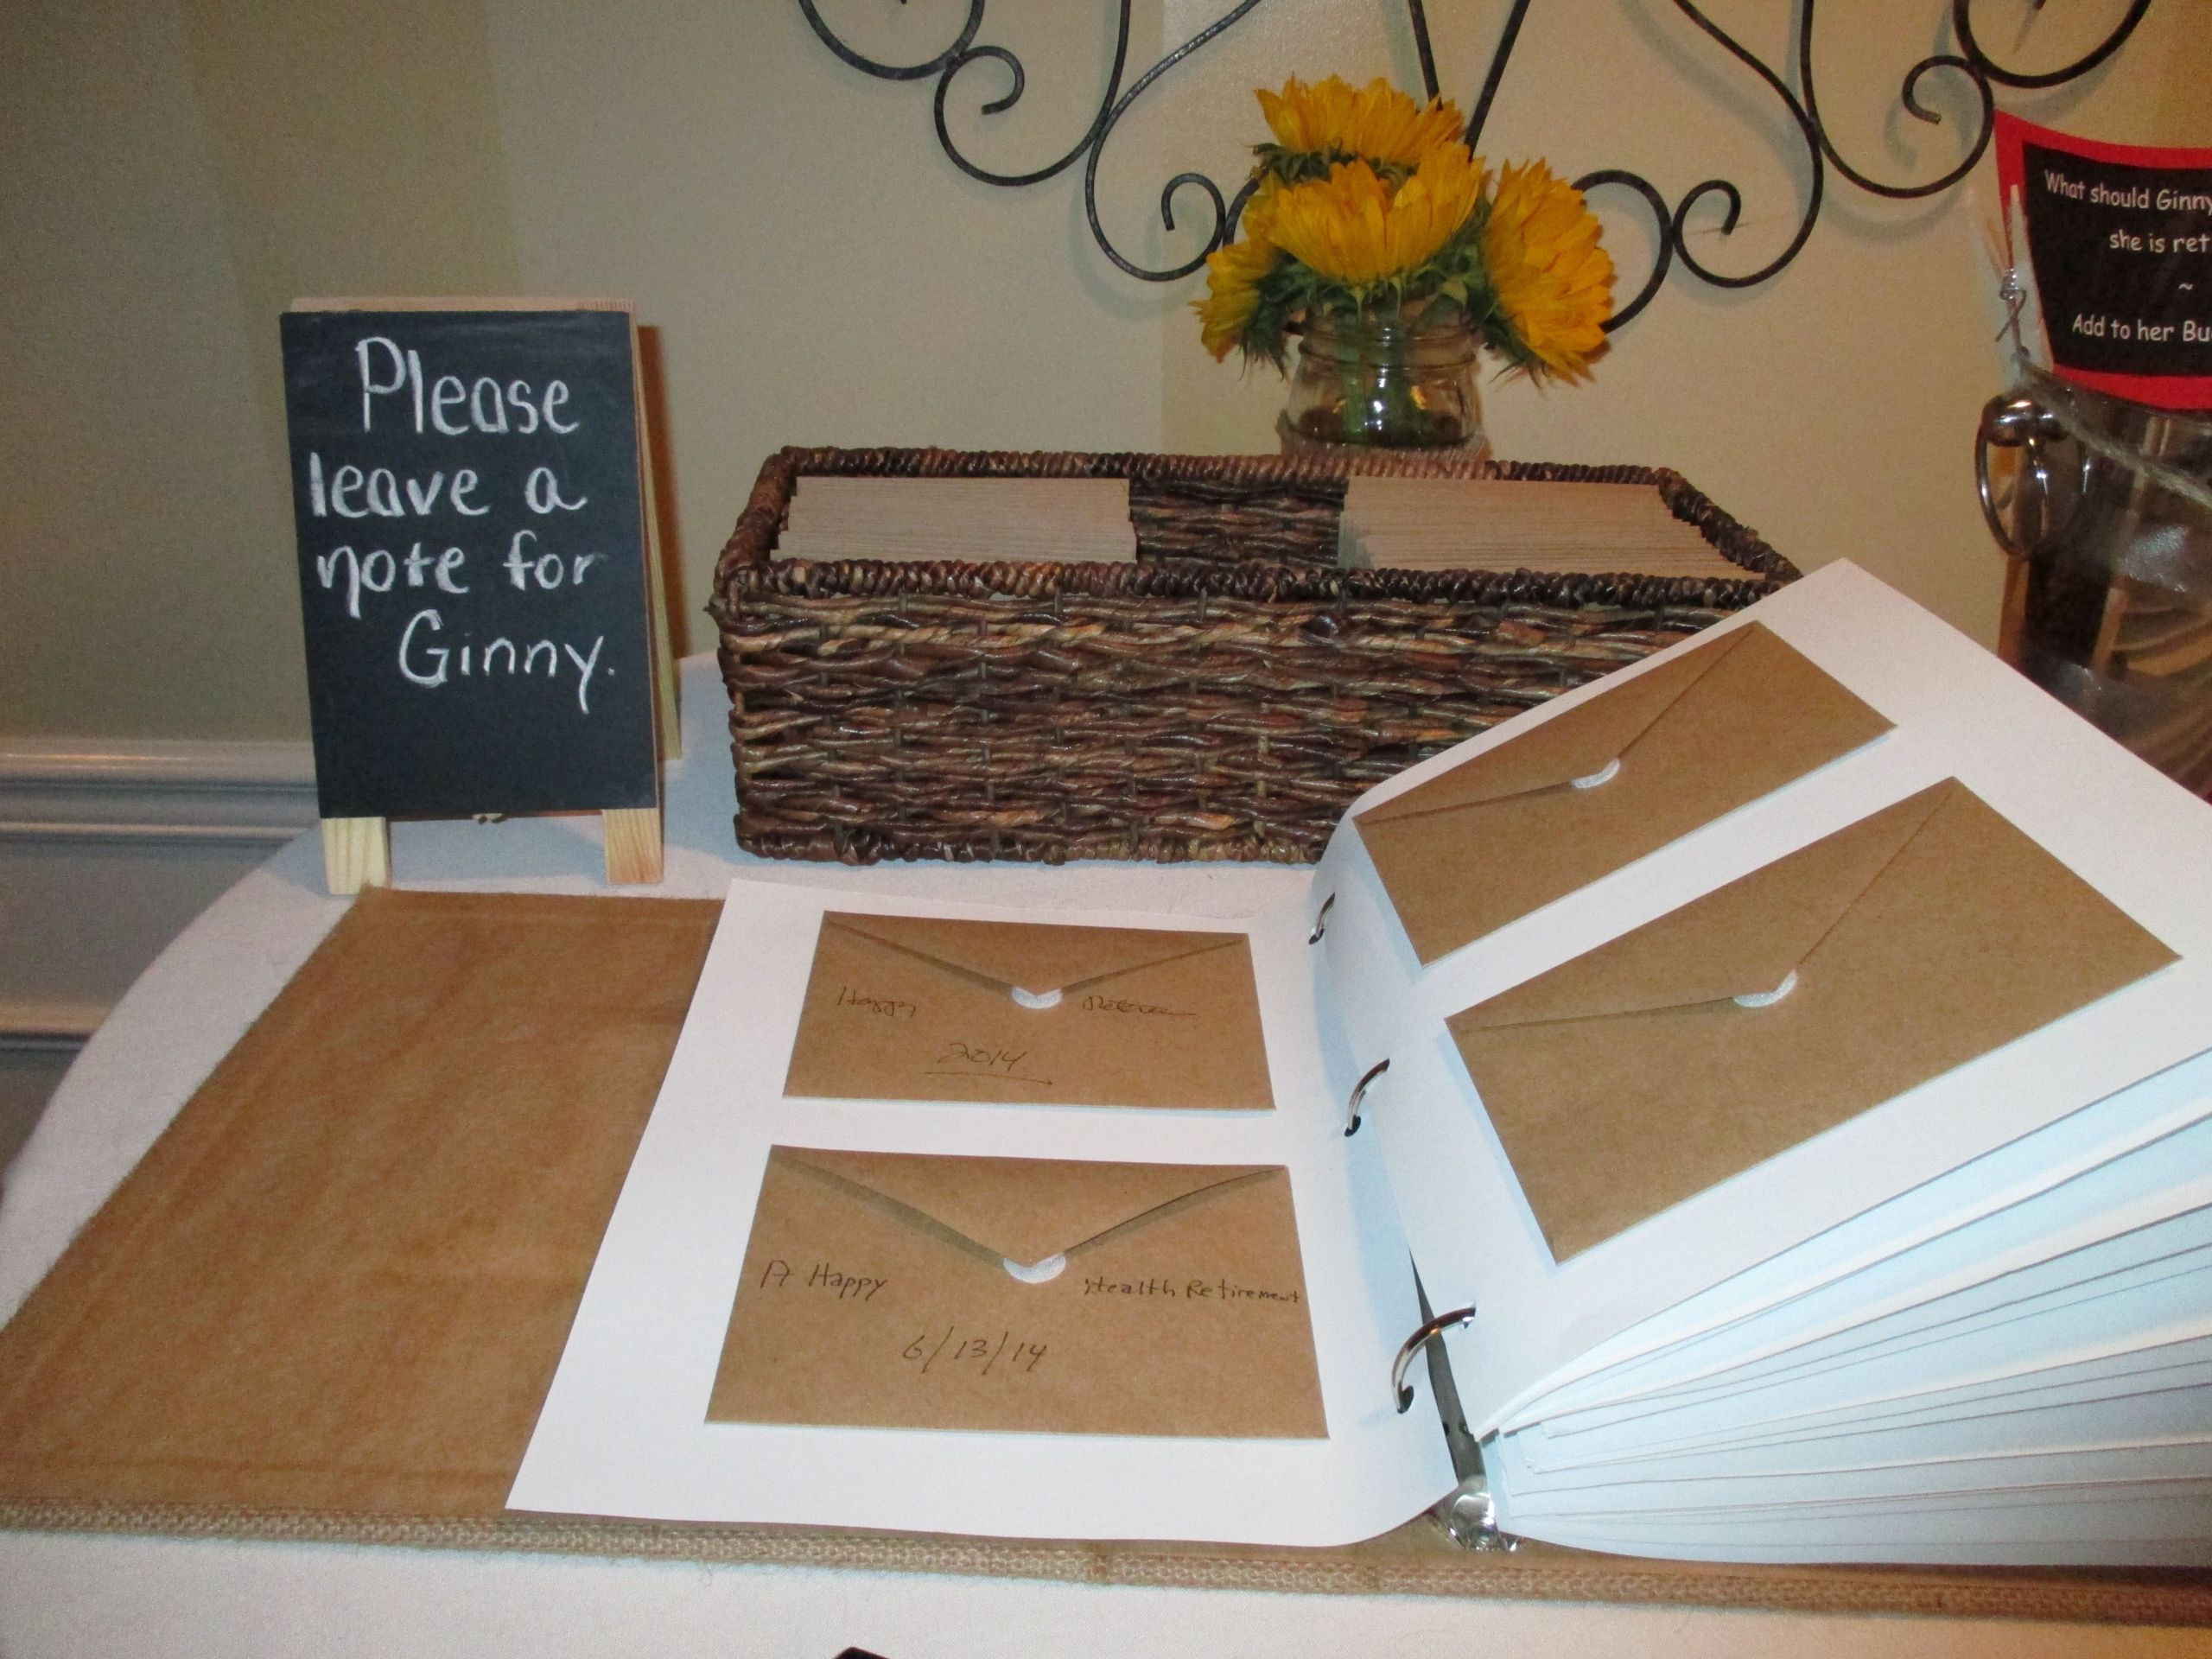 Guest Book Ideas For Retirement Party
 Leave a note for Ginny Retirement party guest book